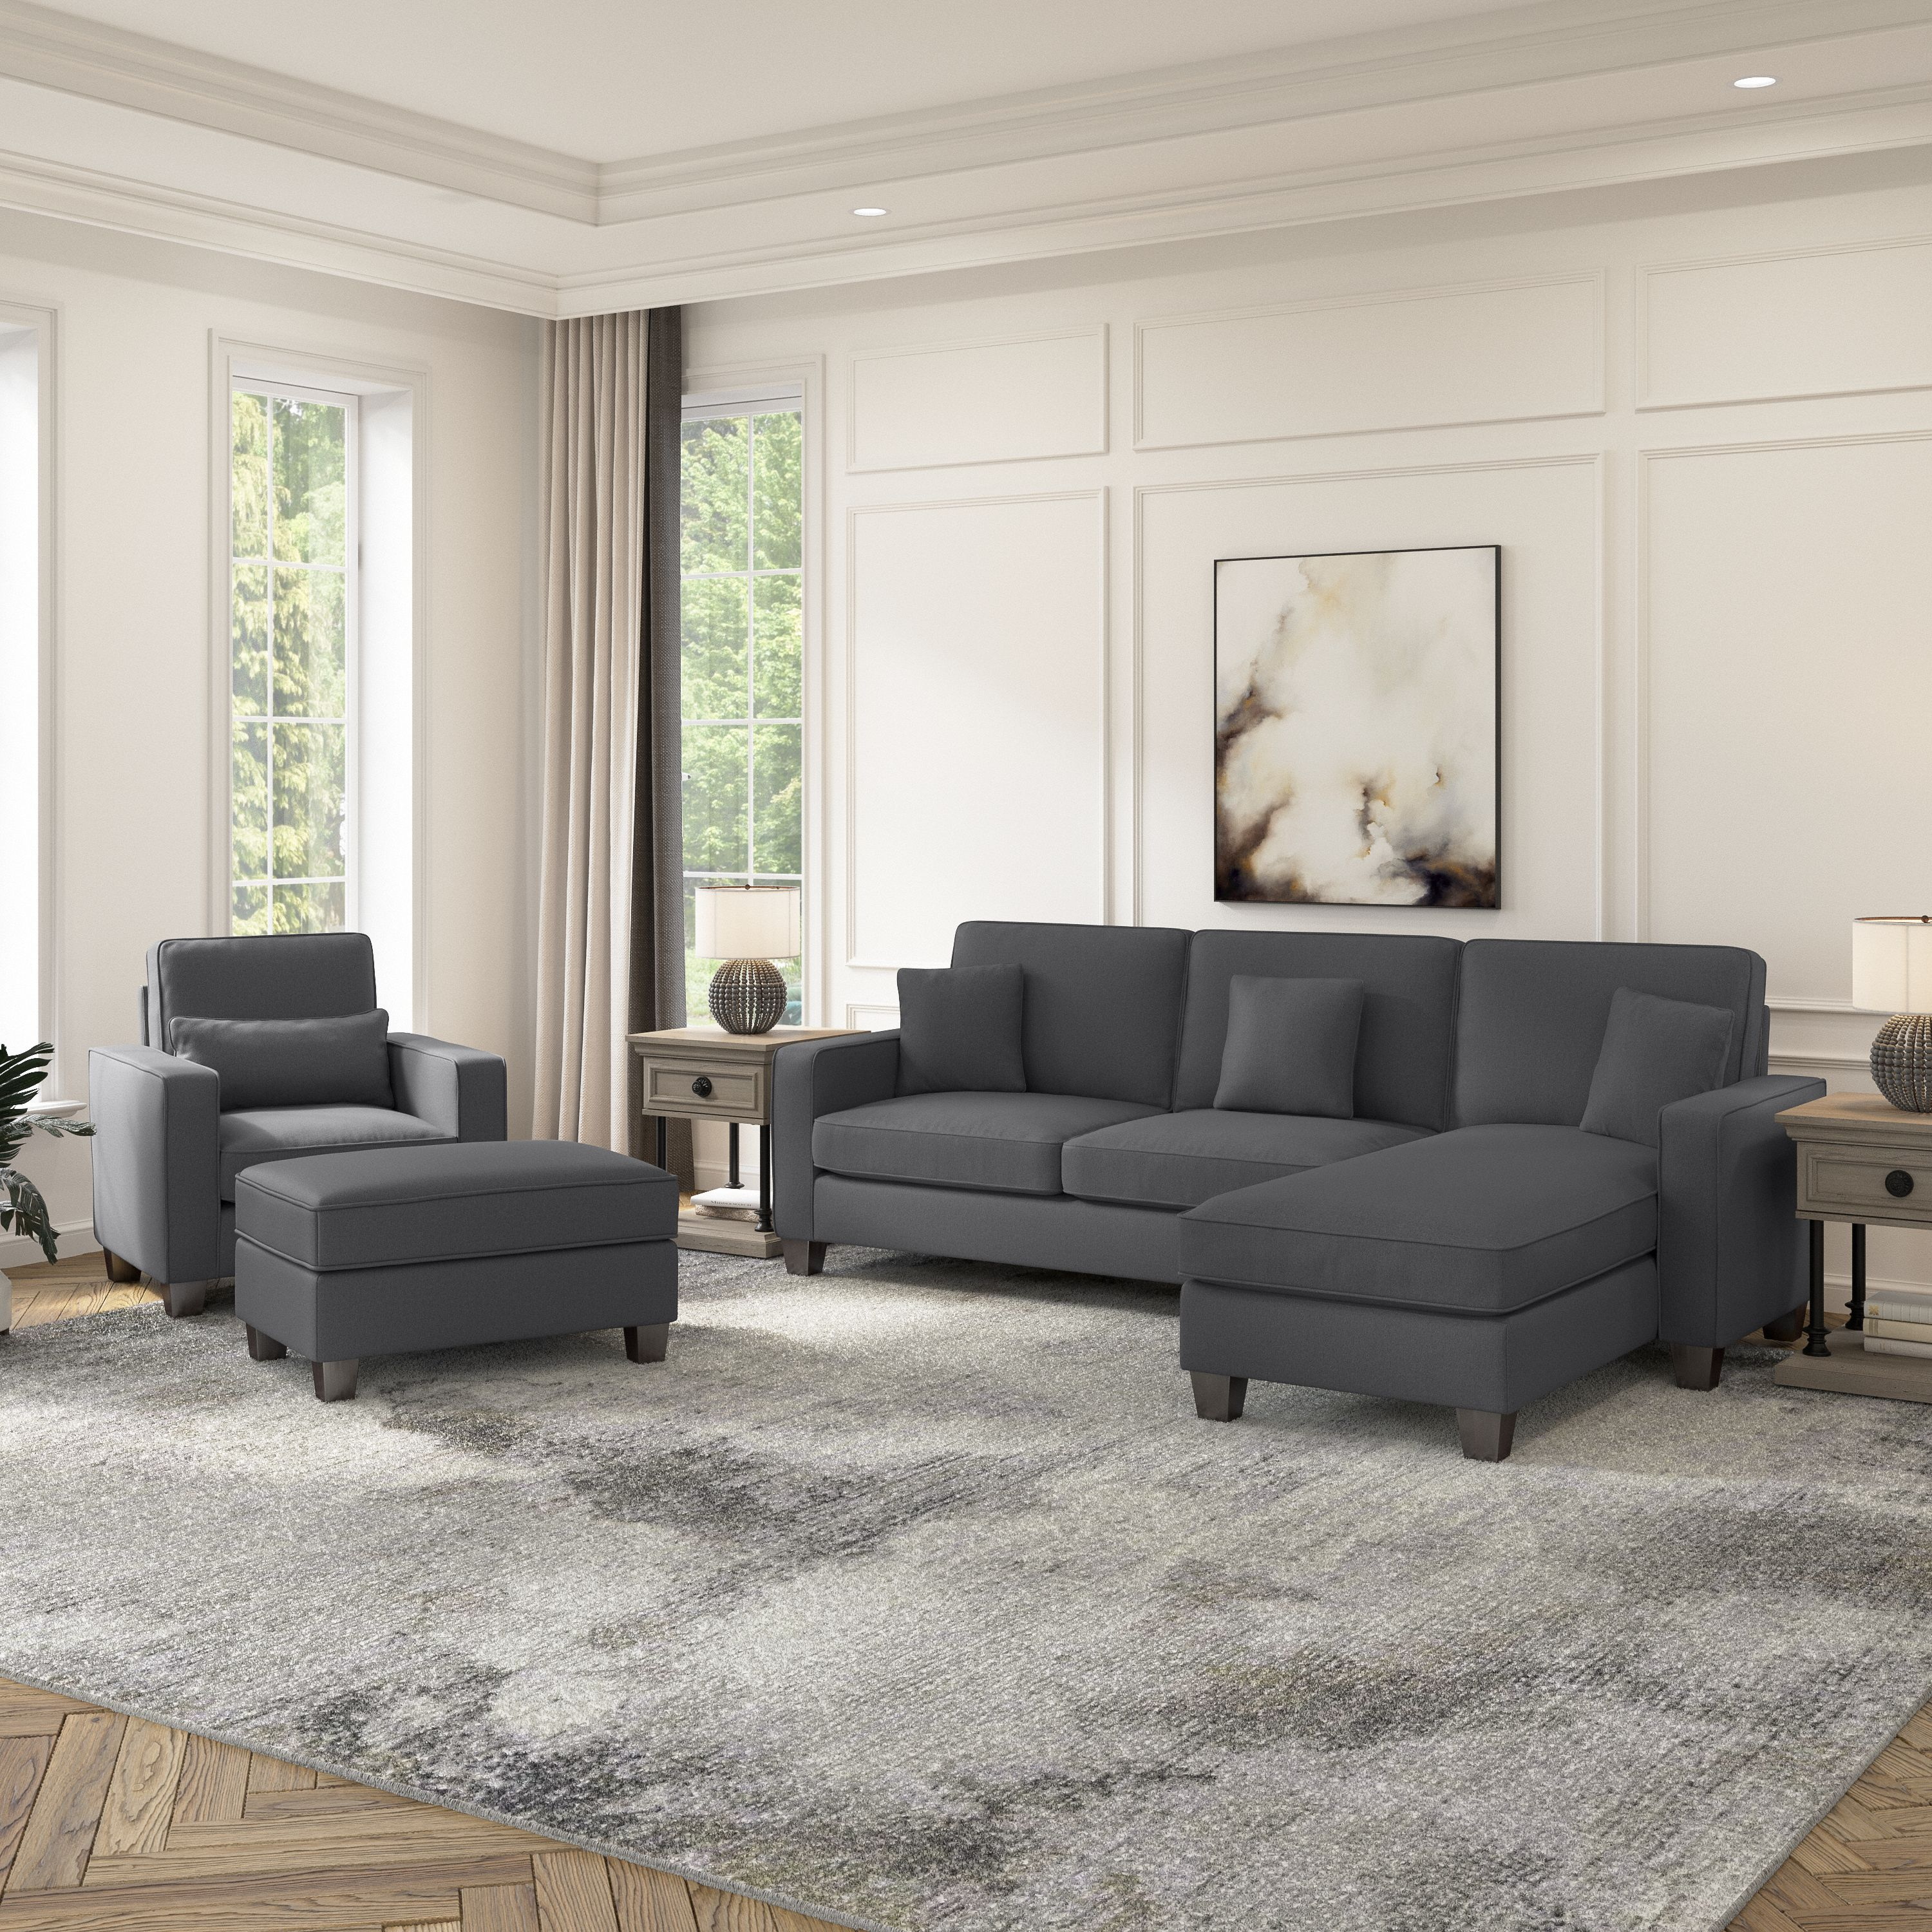 Shop Bush Furniture Stockton 102W Sectional Couch with Reversible Chaise Lounge, Accent Chair, and Ottoman 01 SKT021CGH #color_charcoal gray herringbone fabr